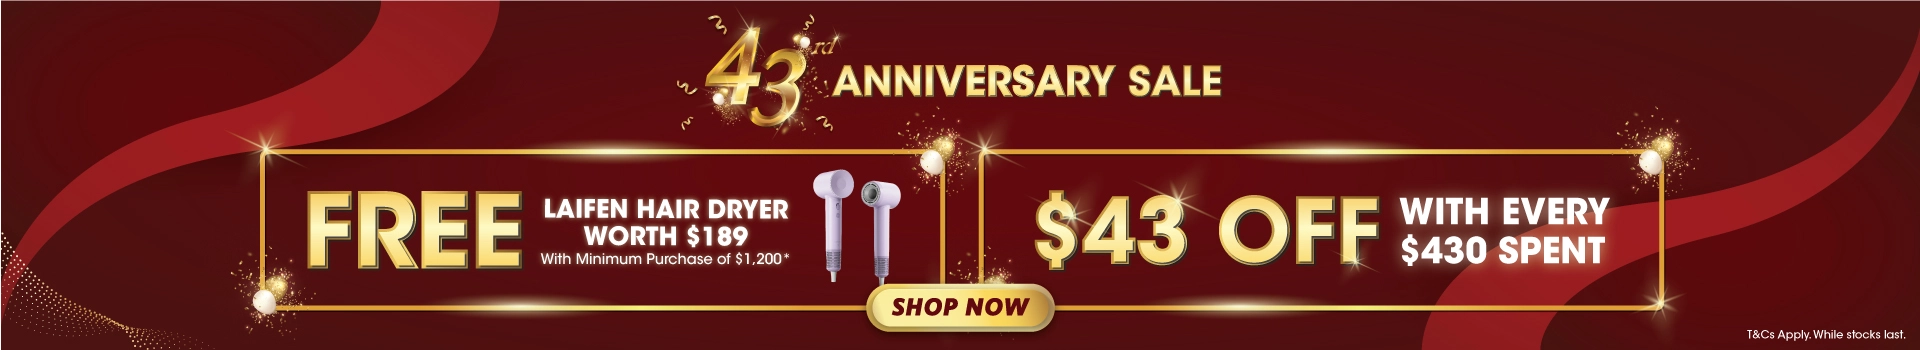 43rd Anniversary Sale | $43 Off With Every $430 Spent | Free Laifen Hair Dryer Worth $189 With Min Spend Of $1,200